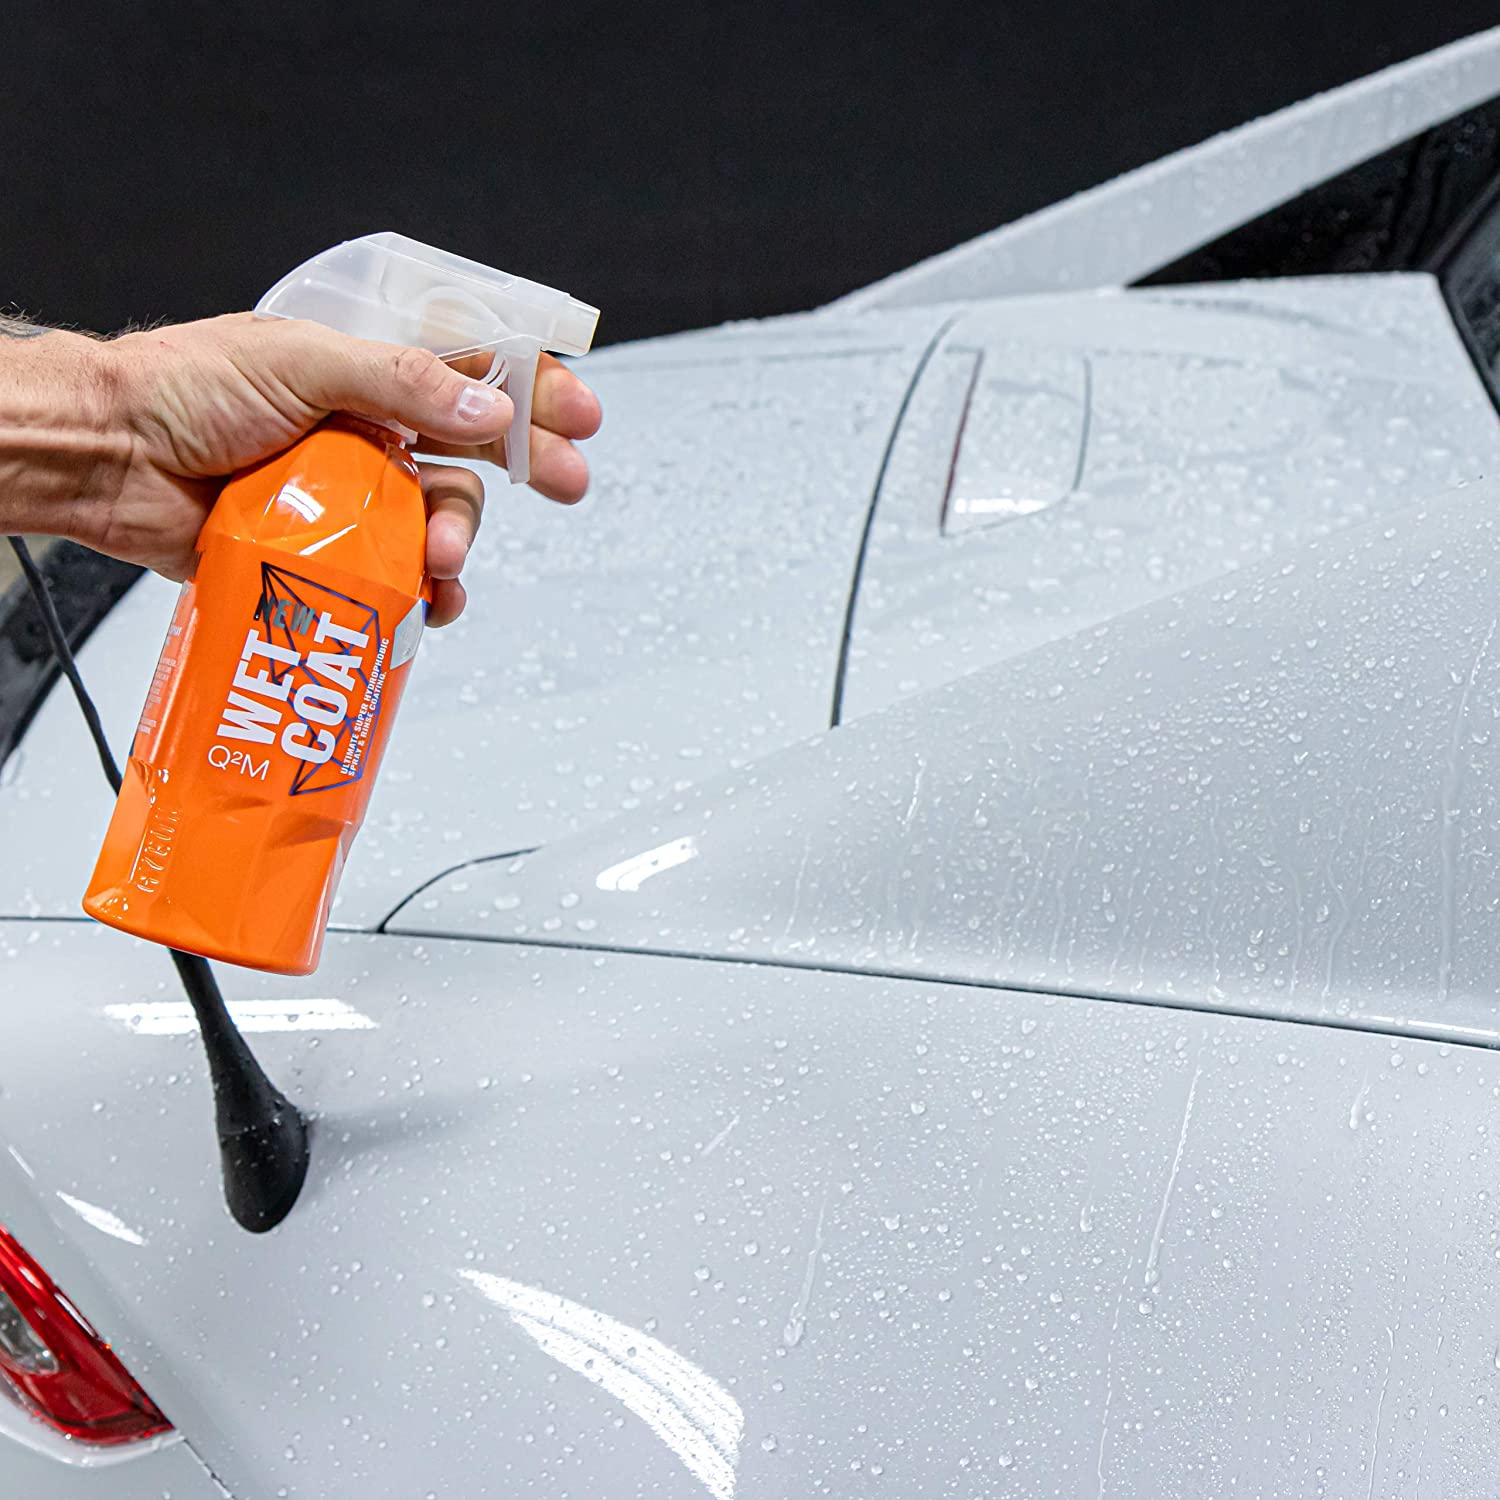 GYEON WET Q2M WET COAT - How to get ULTIMATE GLOSS